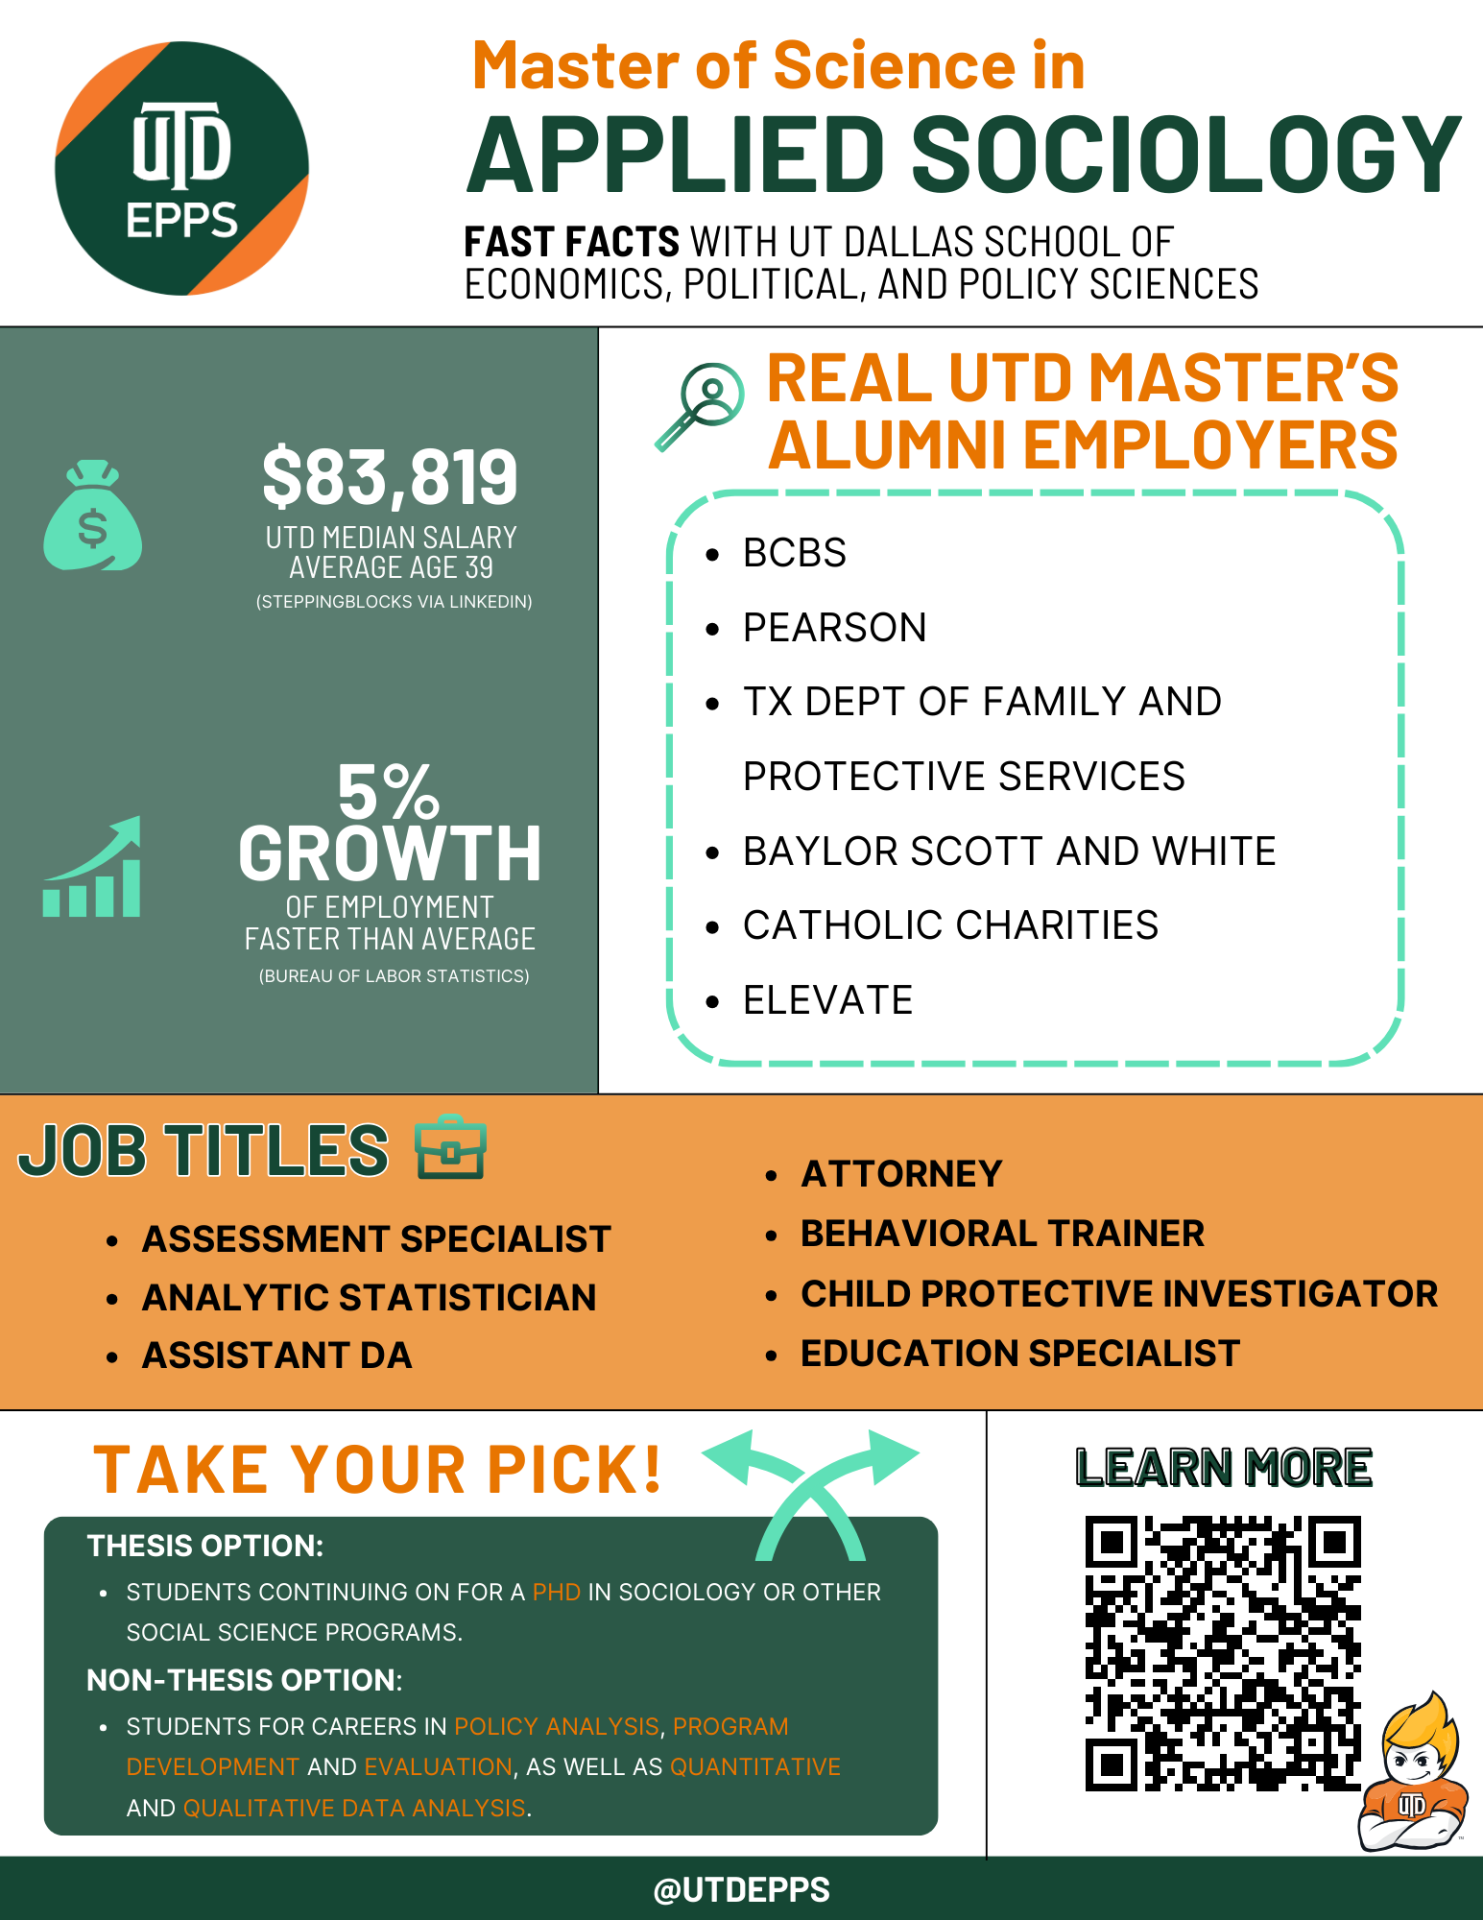 Master of Science in Applied Sociology. Fast Facts with Ut Dallas school of economics, political, and policy sciences.

,819 is the UTD Median Salary (Average age 39). Data is from Steppingblocks via Linkedin. 5% Growth of employment which is faster than average. Data is from Bureau of Labor Statistics.

REAL UTD MASTER’S ALUMNI EMPLOYERS include:
BCBS
Pearson
TX Dept of Family and Protective Services
Baylor Scott and White
Catholic Charities
Elevate

Job titles include:
Assessment specialist
Analytic statistician
Assistant DA
Attorney
Behavioral Trainer
Child Protective Investigator
Education Specialist

TAKE YOUR PICK!
Thesis Option: 
students continuing on for a PhD in sociology or other social science programs.
Non-Thesis Option:
students for careers in policy analysis, program development and evaluation, as well as quantitative and qualitative data analysis.

Learn more by scanning the QR code.

@UTDEPPS